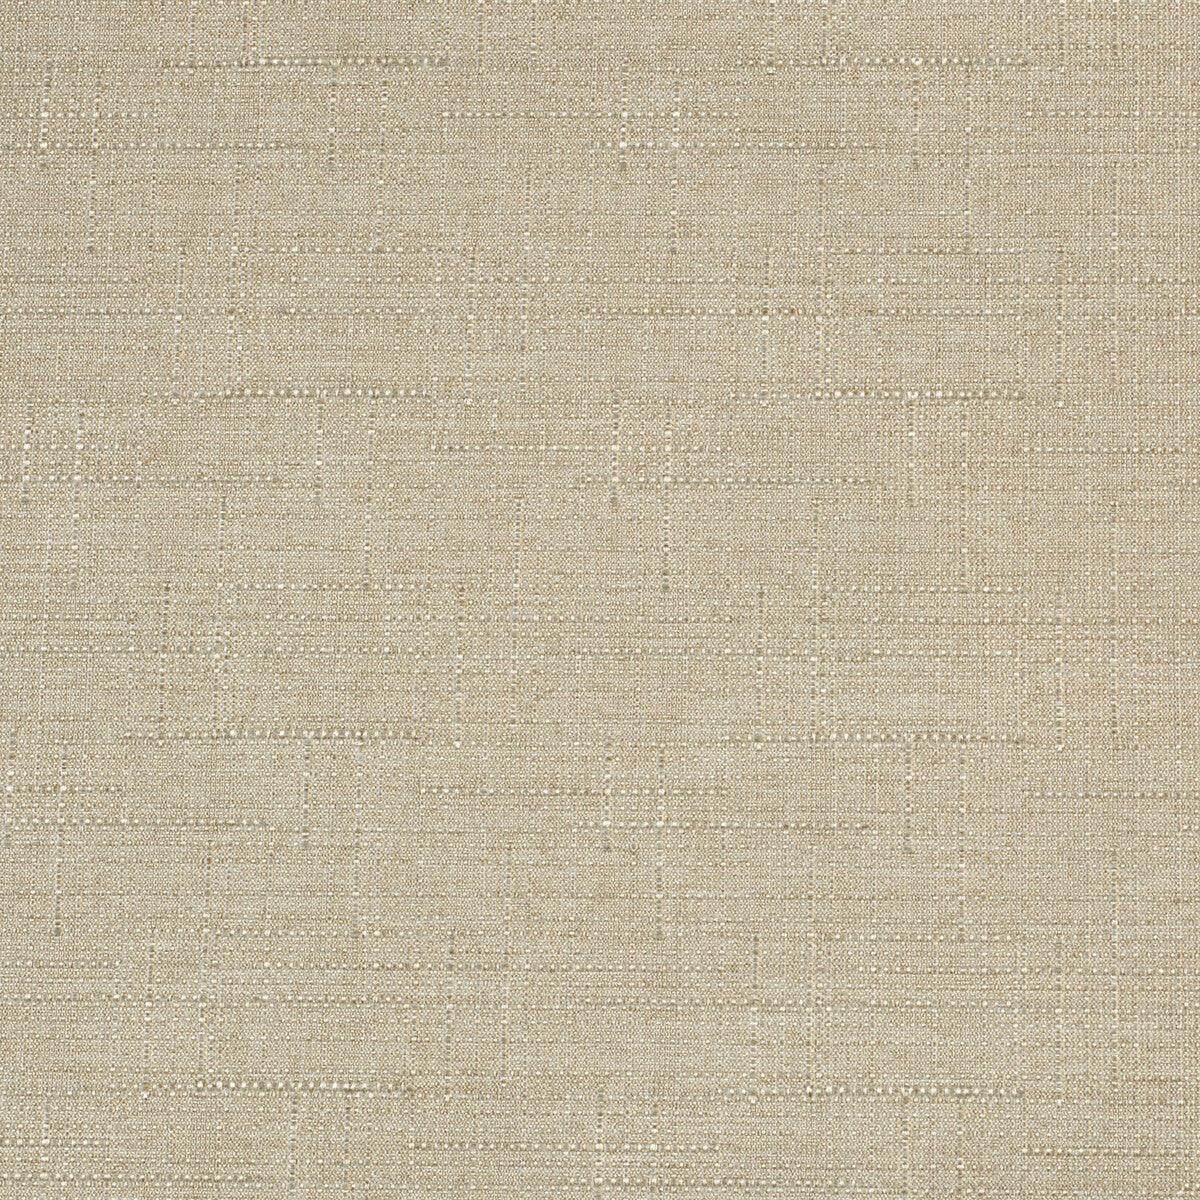 Kravet Contract fabric in 4321-16 color - pattern 4321.16.0 - by Kravet Contract